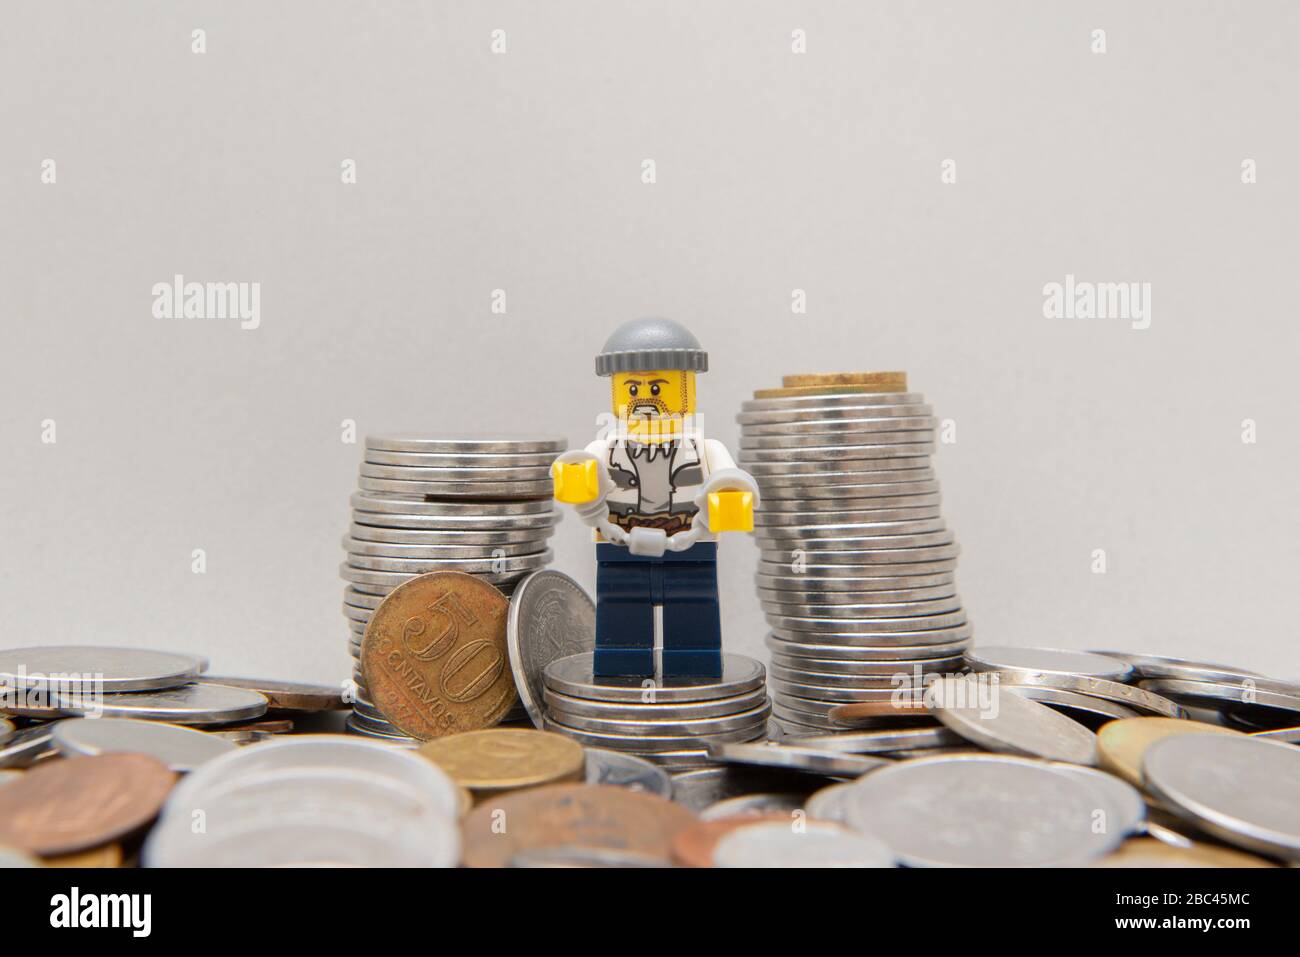 Florianopolis, Brazil, March 28, 2020: Bandit handcuffed next to a pile of coins. Crime does not pay on white background. Bank robbery. Lego minifigur Stock Photo